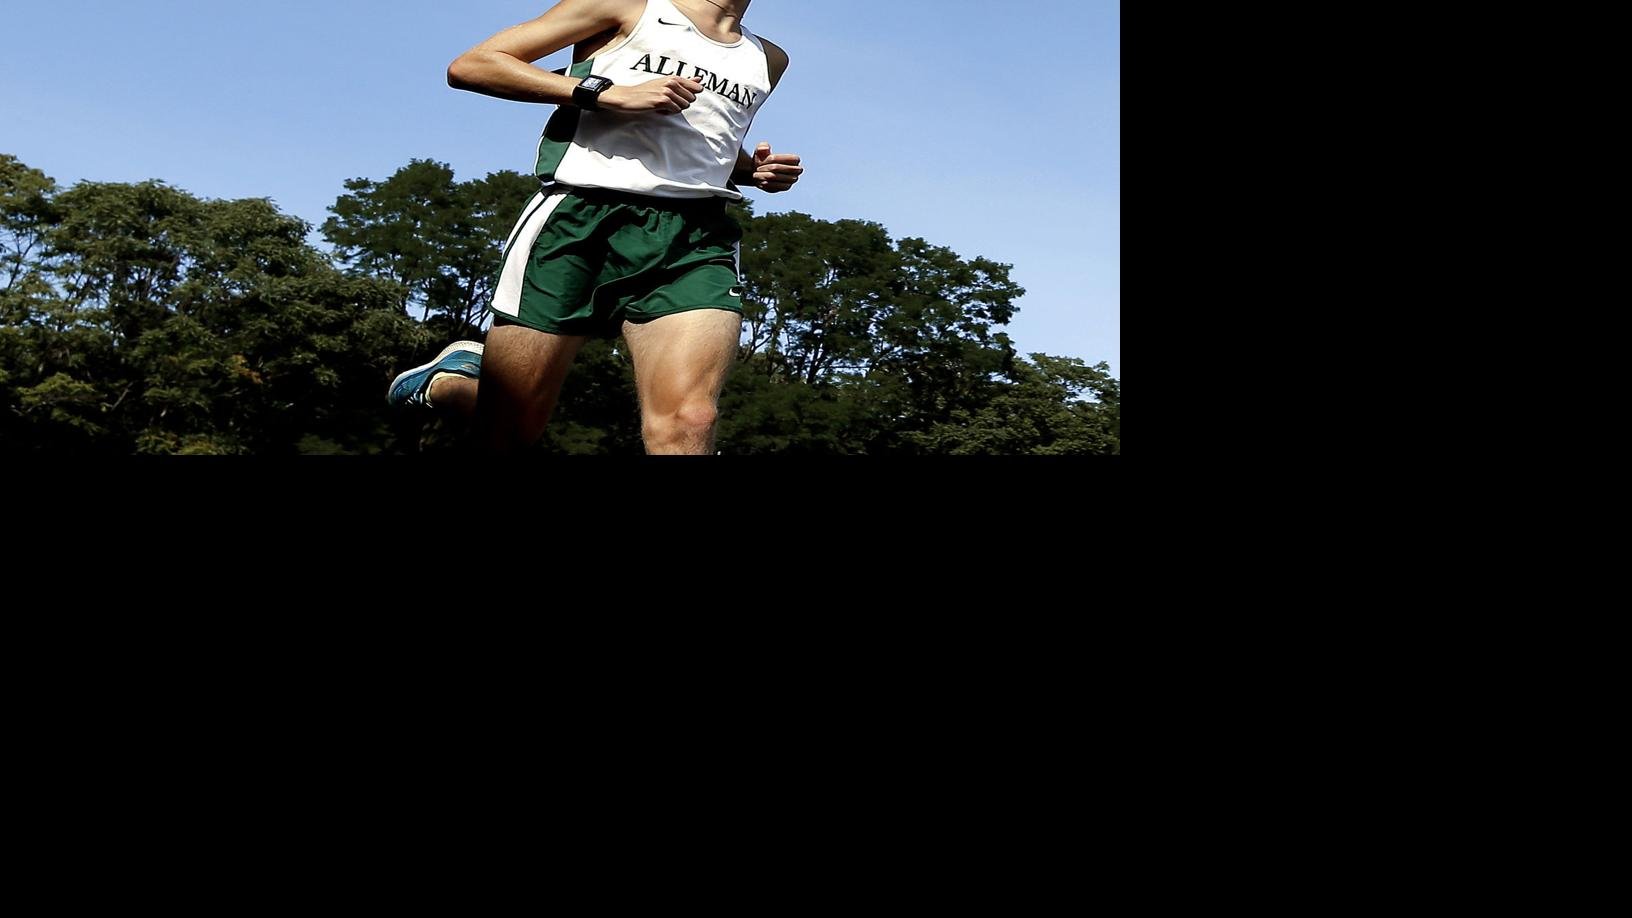 Not surprisingly, Alleman's Smith aiming high in cross country | High